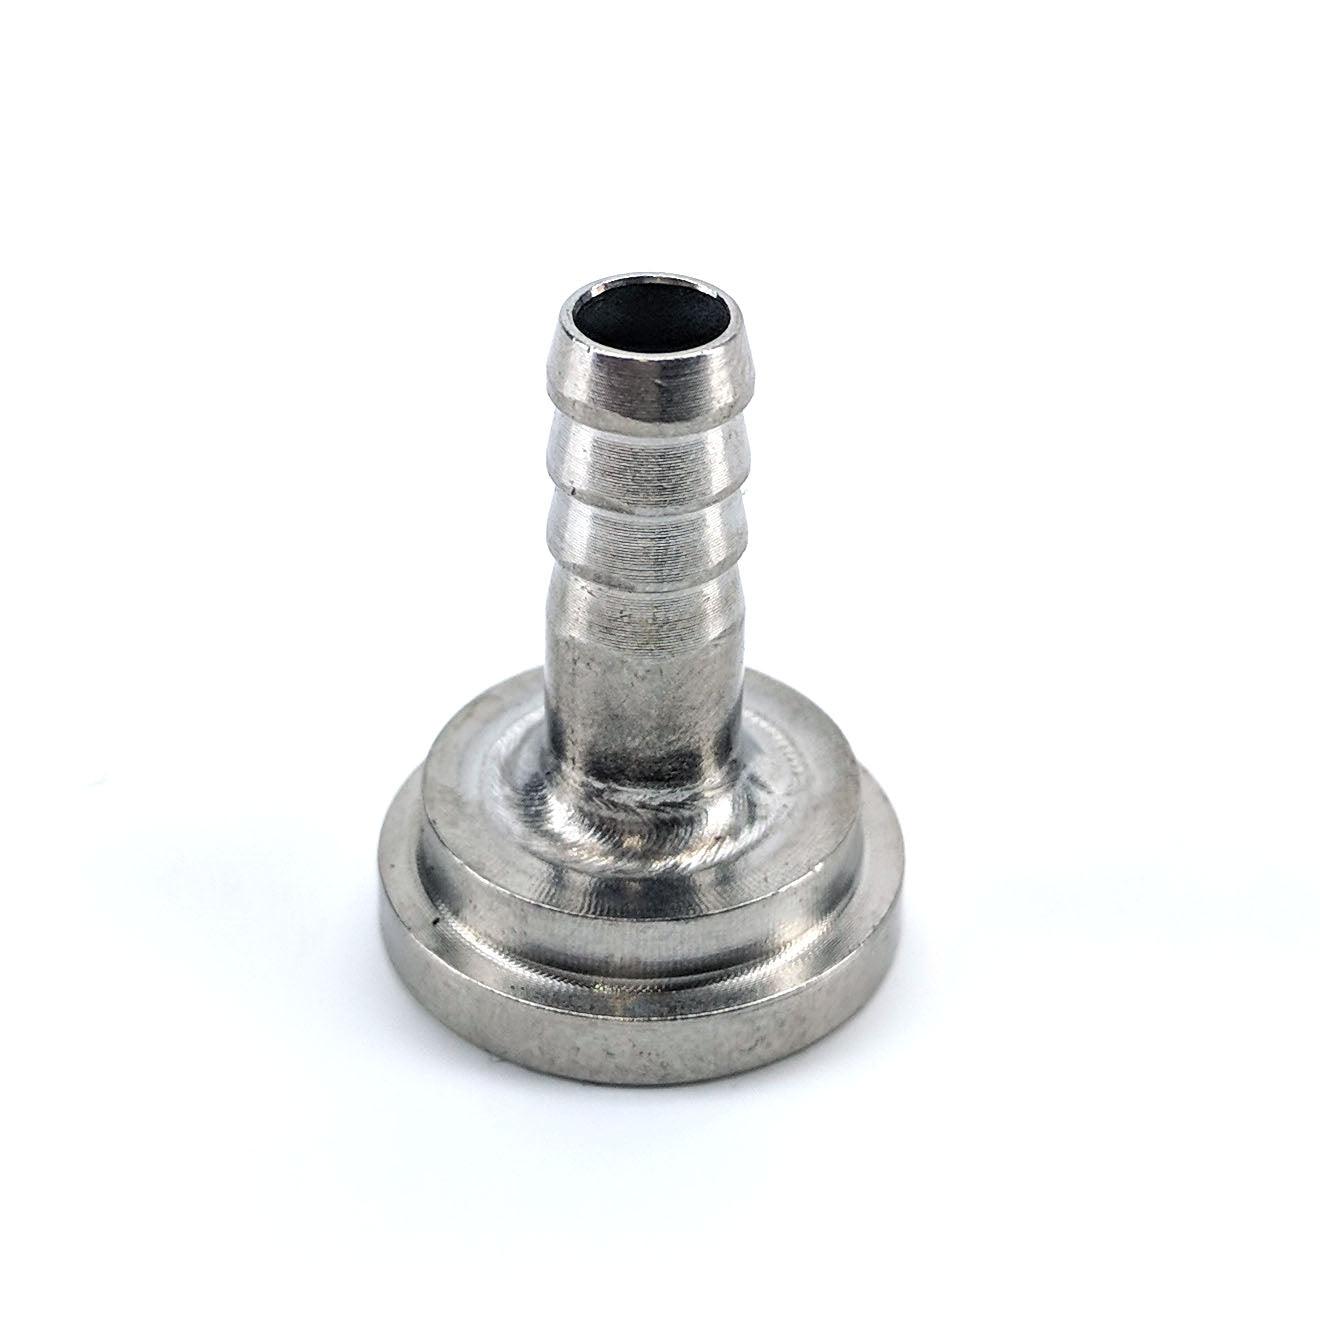 6mm Straight Barbtail for (for 5/8 Hex Nut) - KegLand